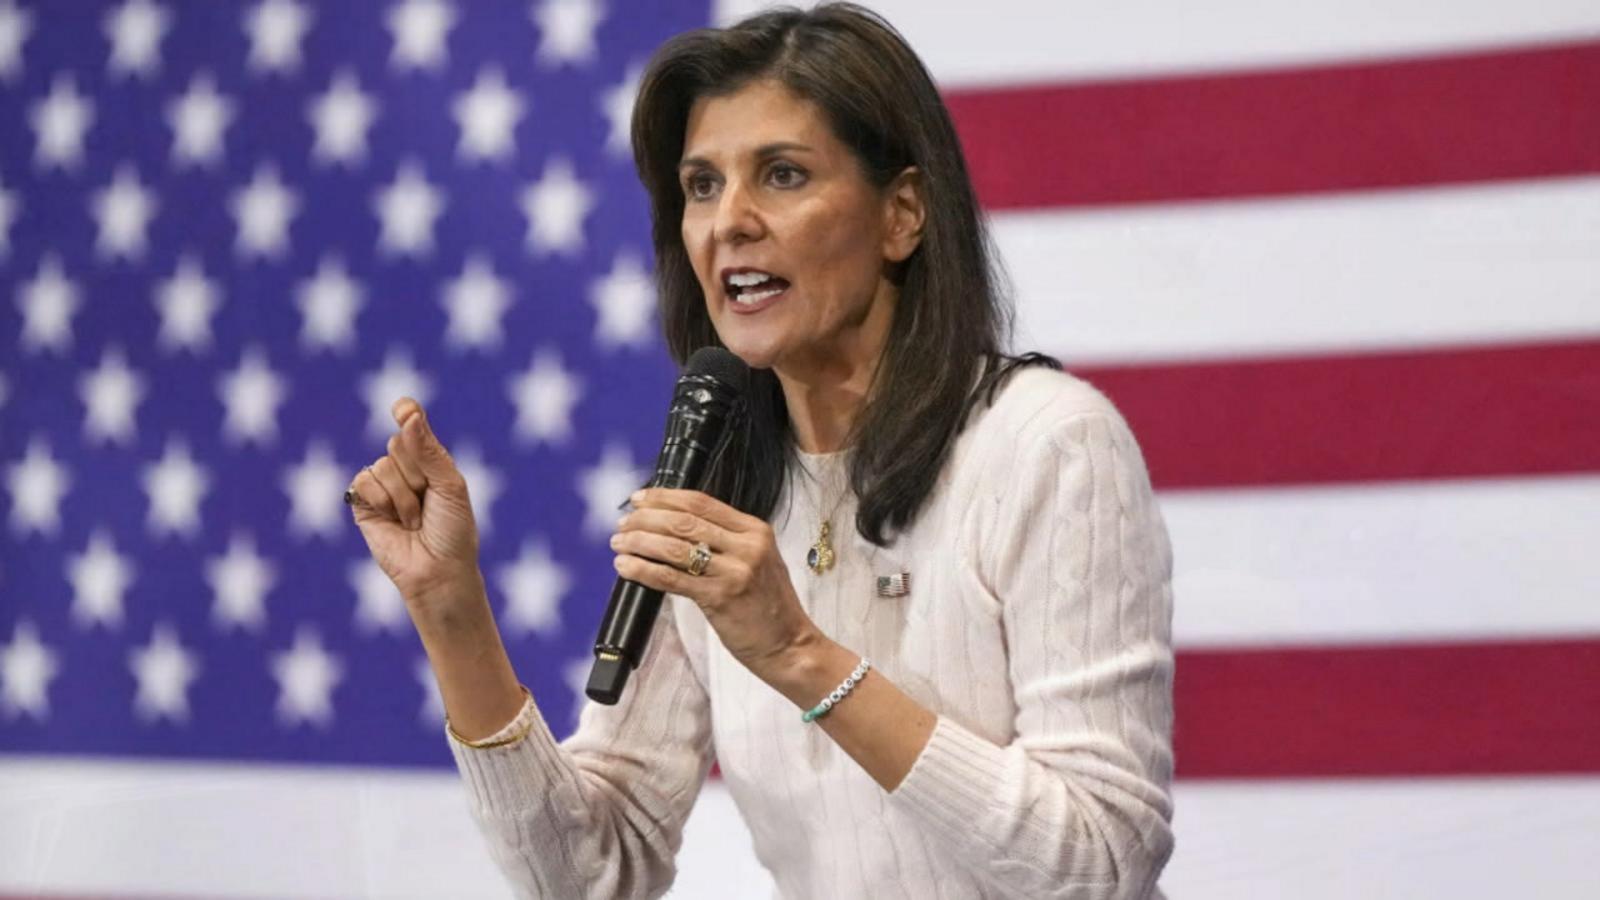 VIDEO: Trump and Haley face off in South Carolina primary